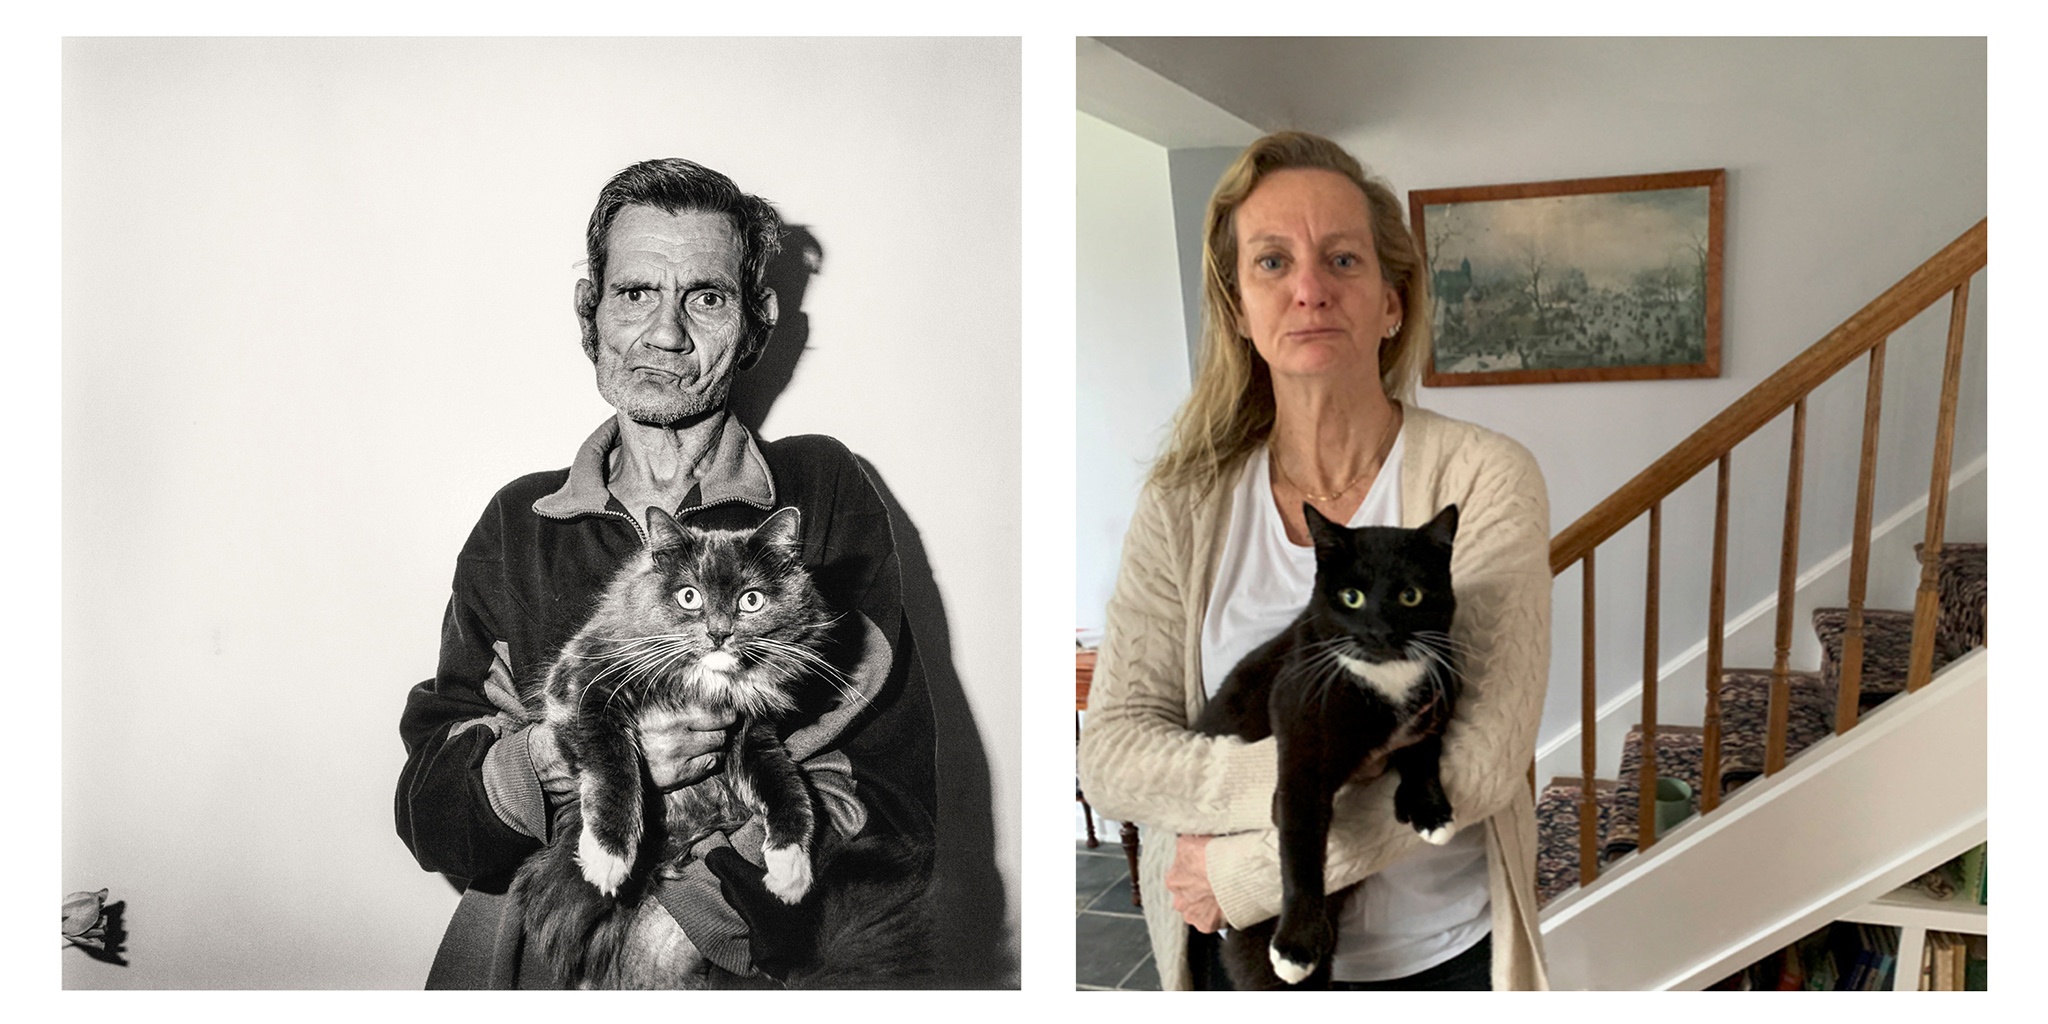 [Roger Ballen's _Man Holding Cat_, 1995, printed 2000, selenium-toned gelatin silver print on Ilford Multigrade paper, 15 5/8 x 15 5/8 inches, The Jack Shear Collection of Photography, 2015.1.126](https://tang.skidmore.edu/collection/artworks/184-man-holding-cat) re-created by Liesje Bluestone '20